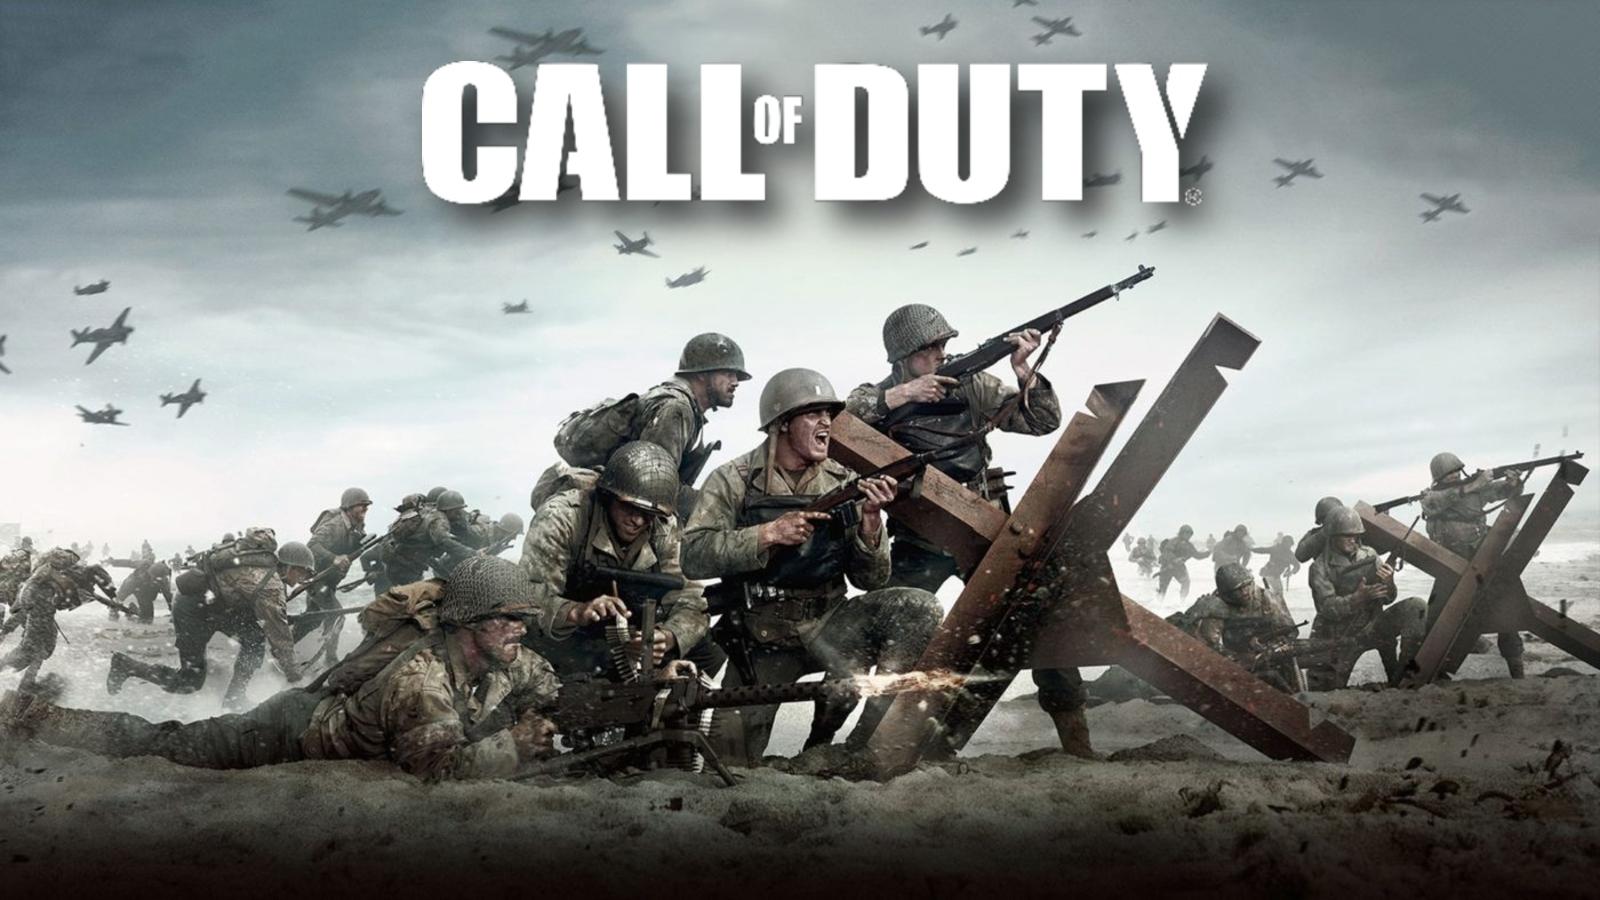 Call of Duty: WWII is on sale! Multiplayer, beta, campaign details